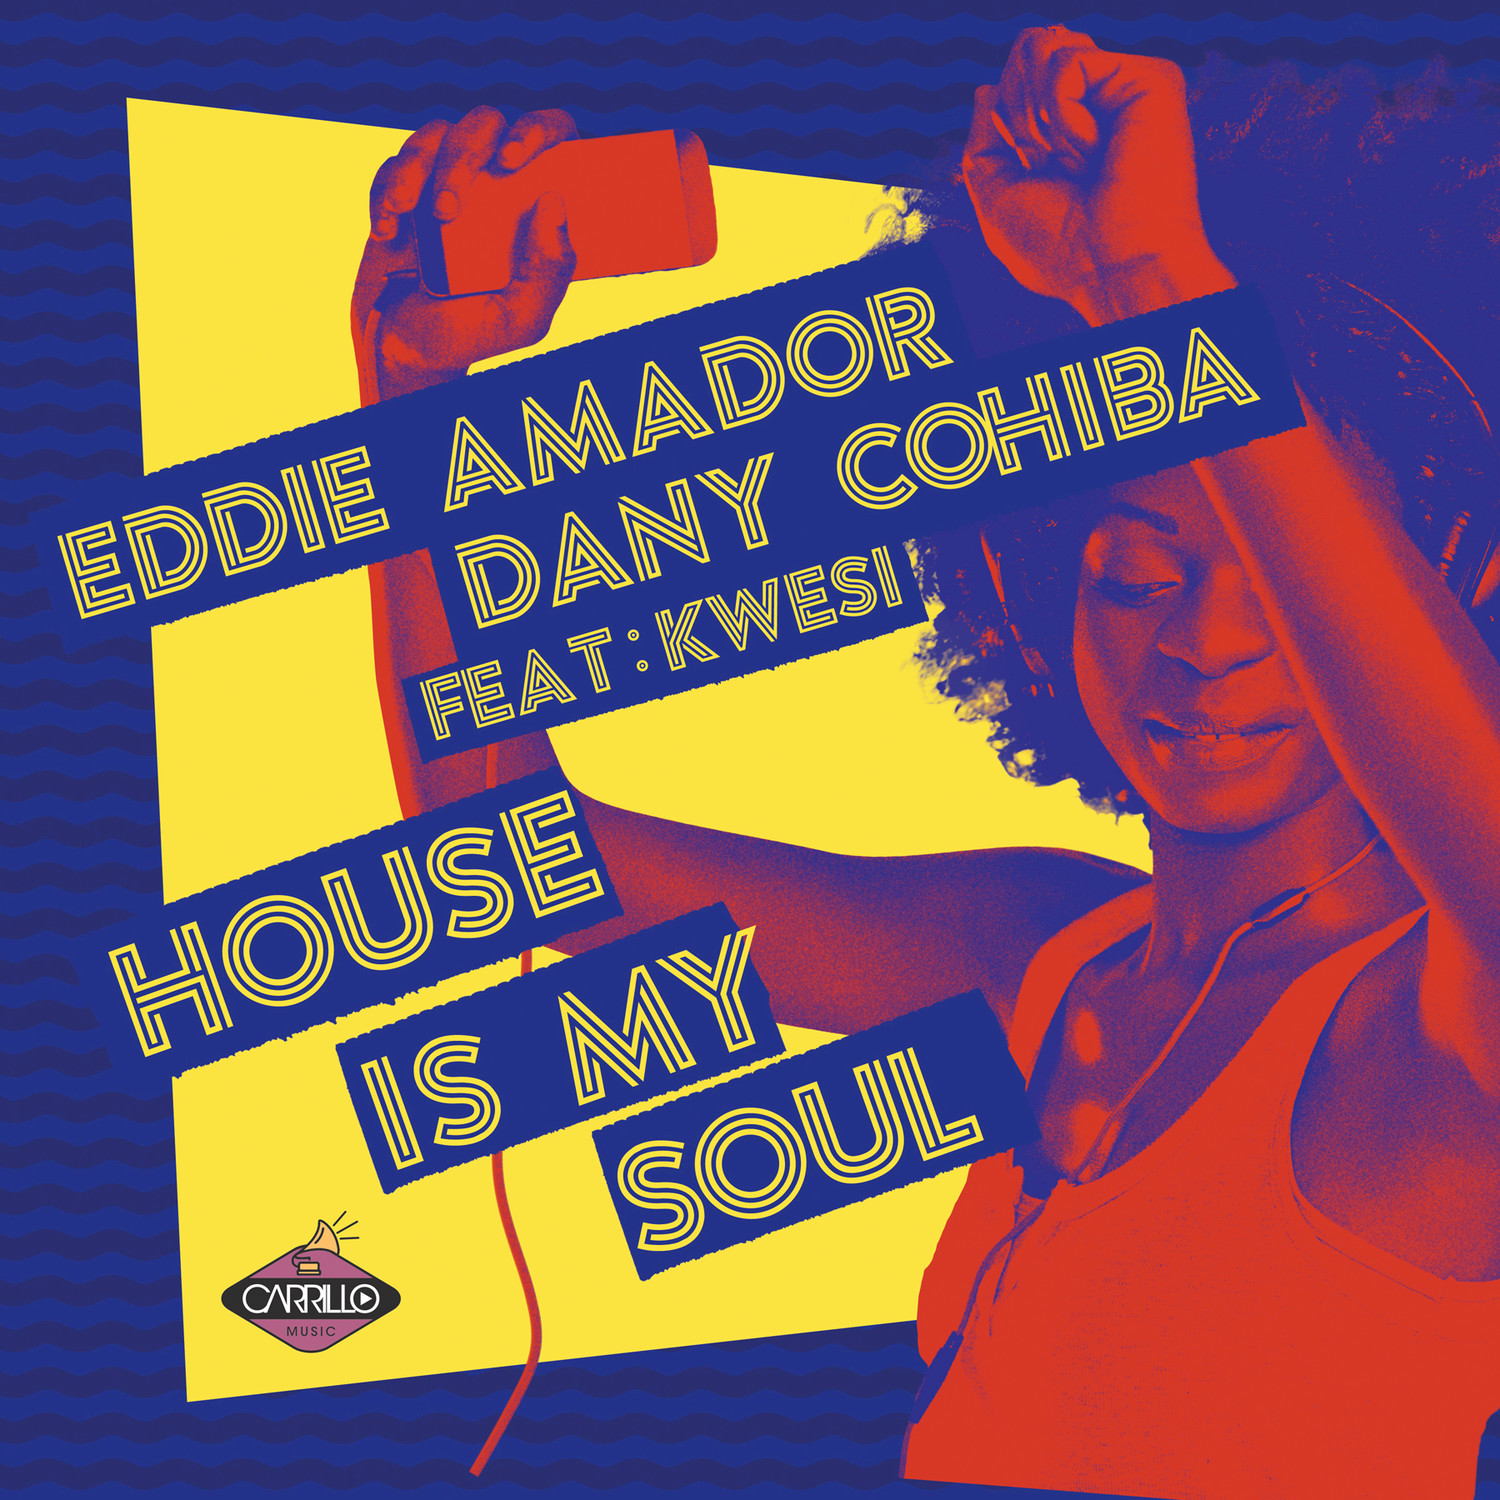 House Is My Soul (Club Mix)